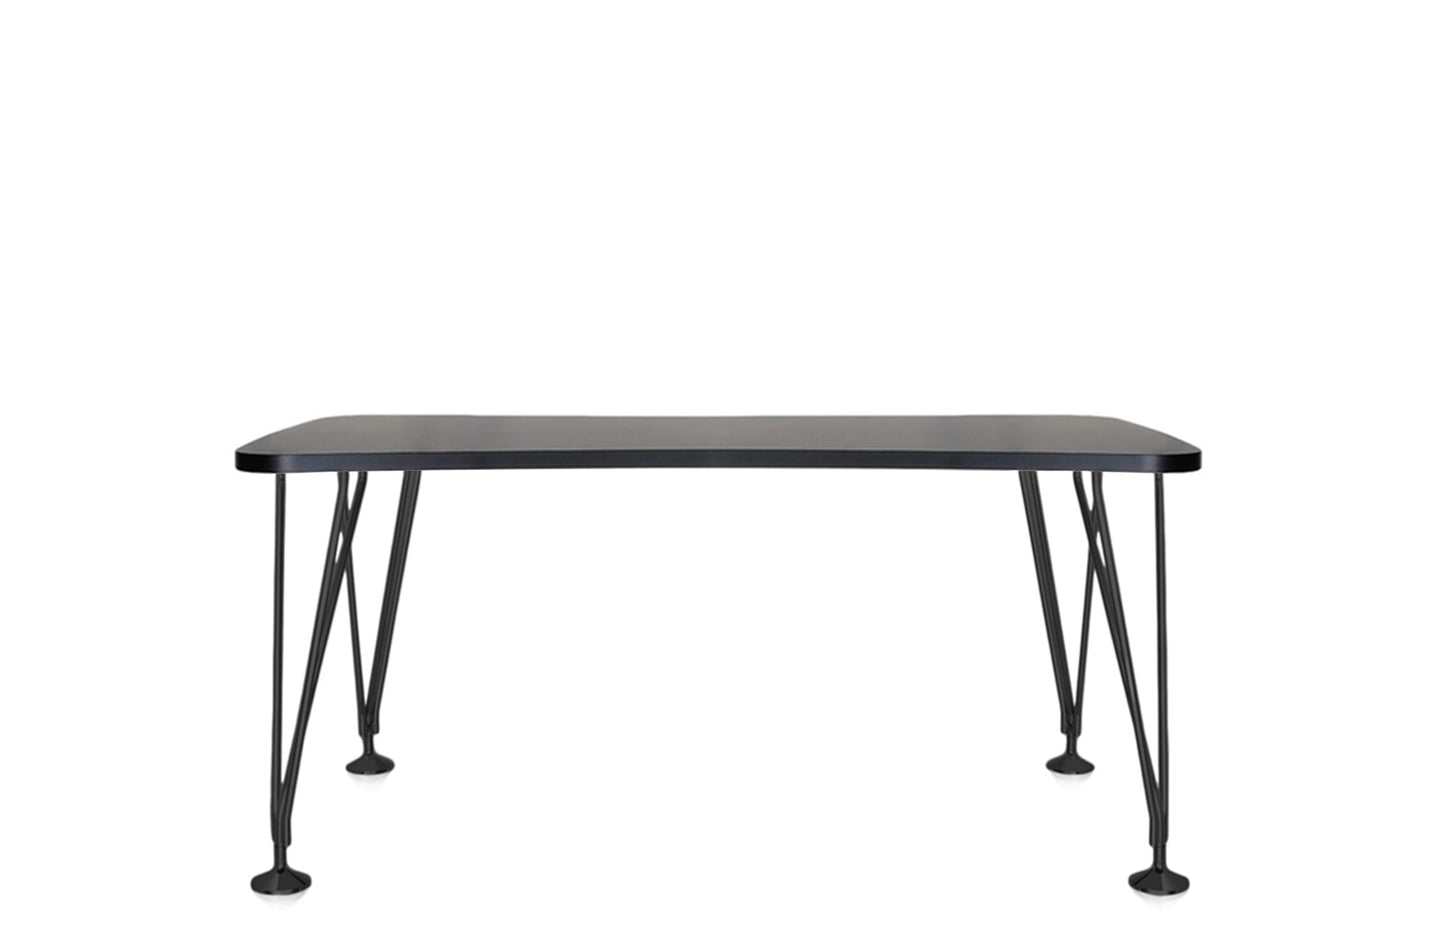 Max Small Table
